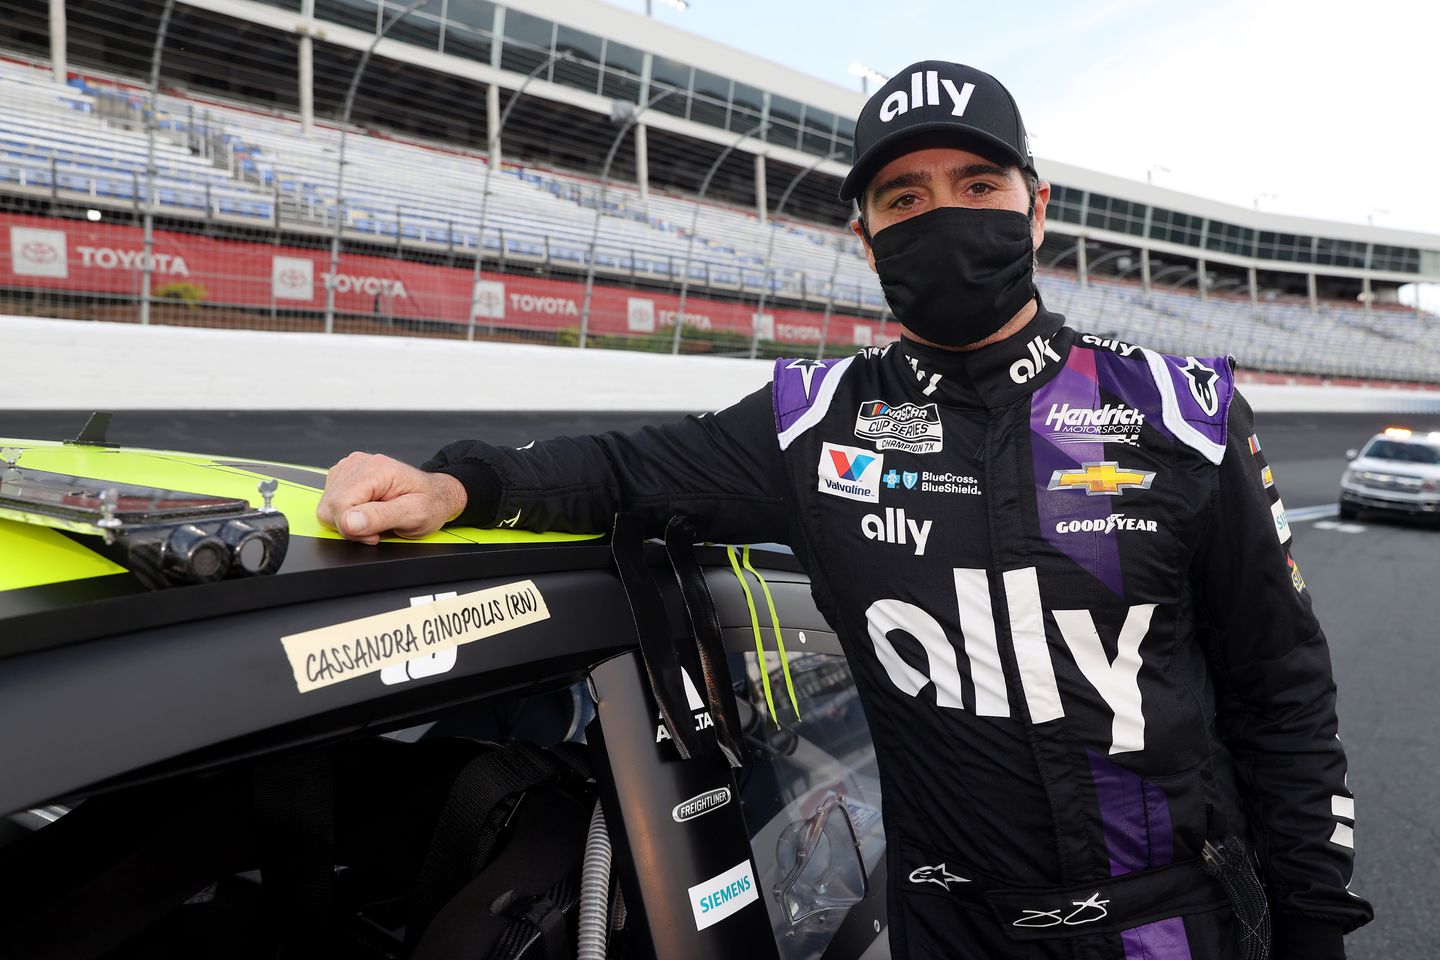 All things considered, can Jimmie Johnson return to Victory Lane and the NASCAR Playoffs?